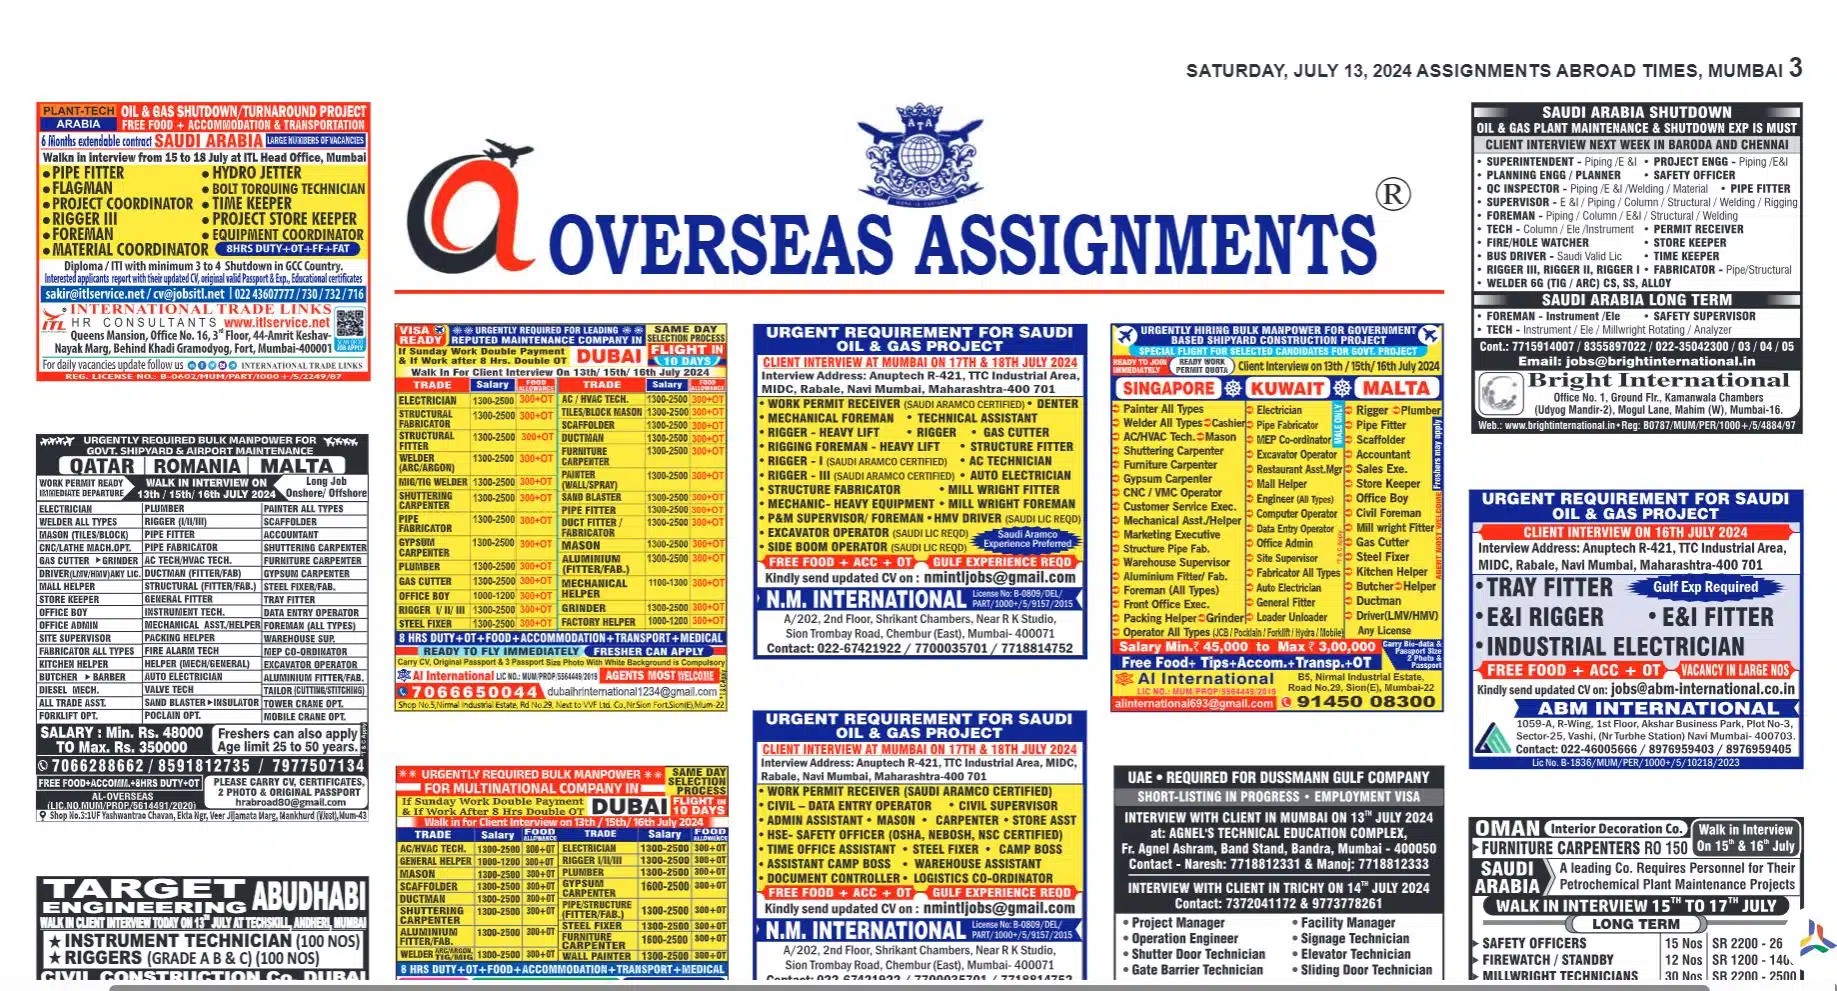 Assignment Abroad Times 13th July 2024